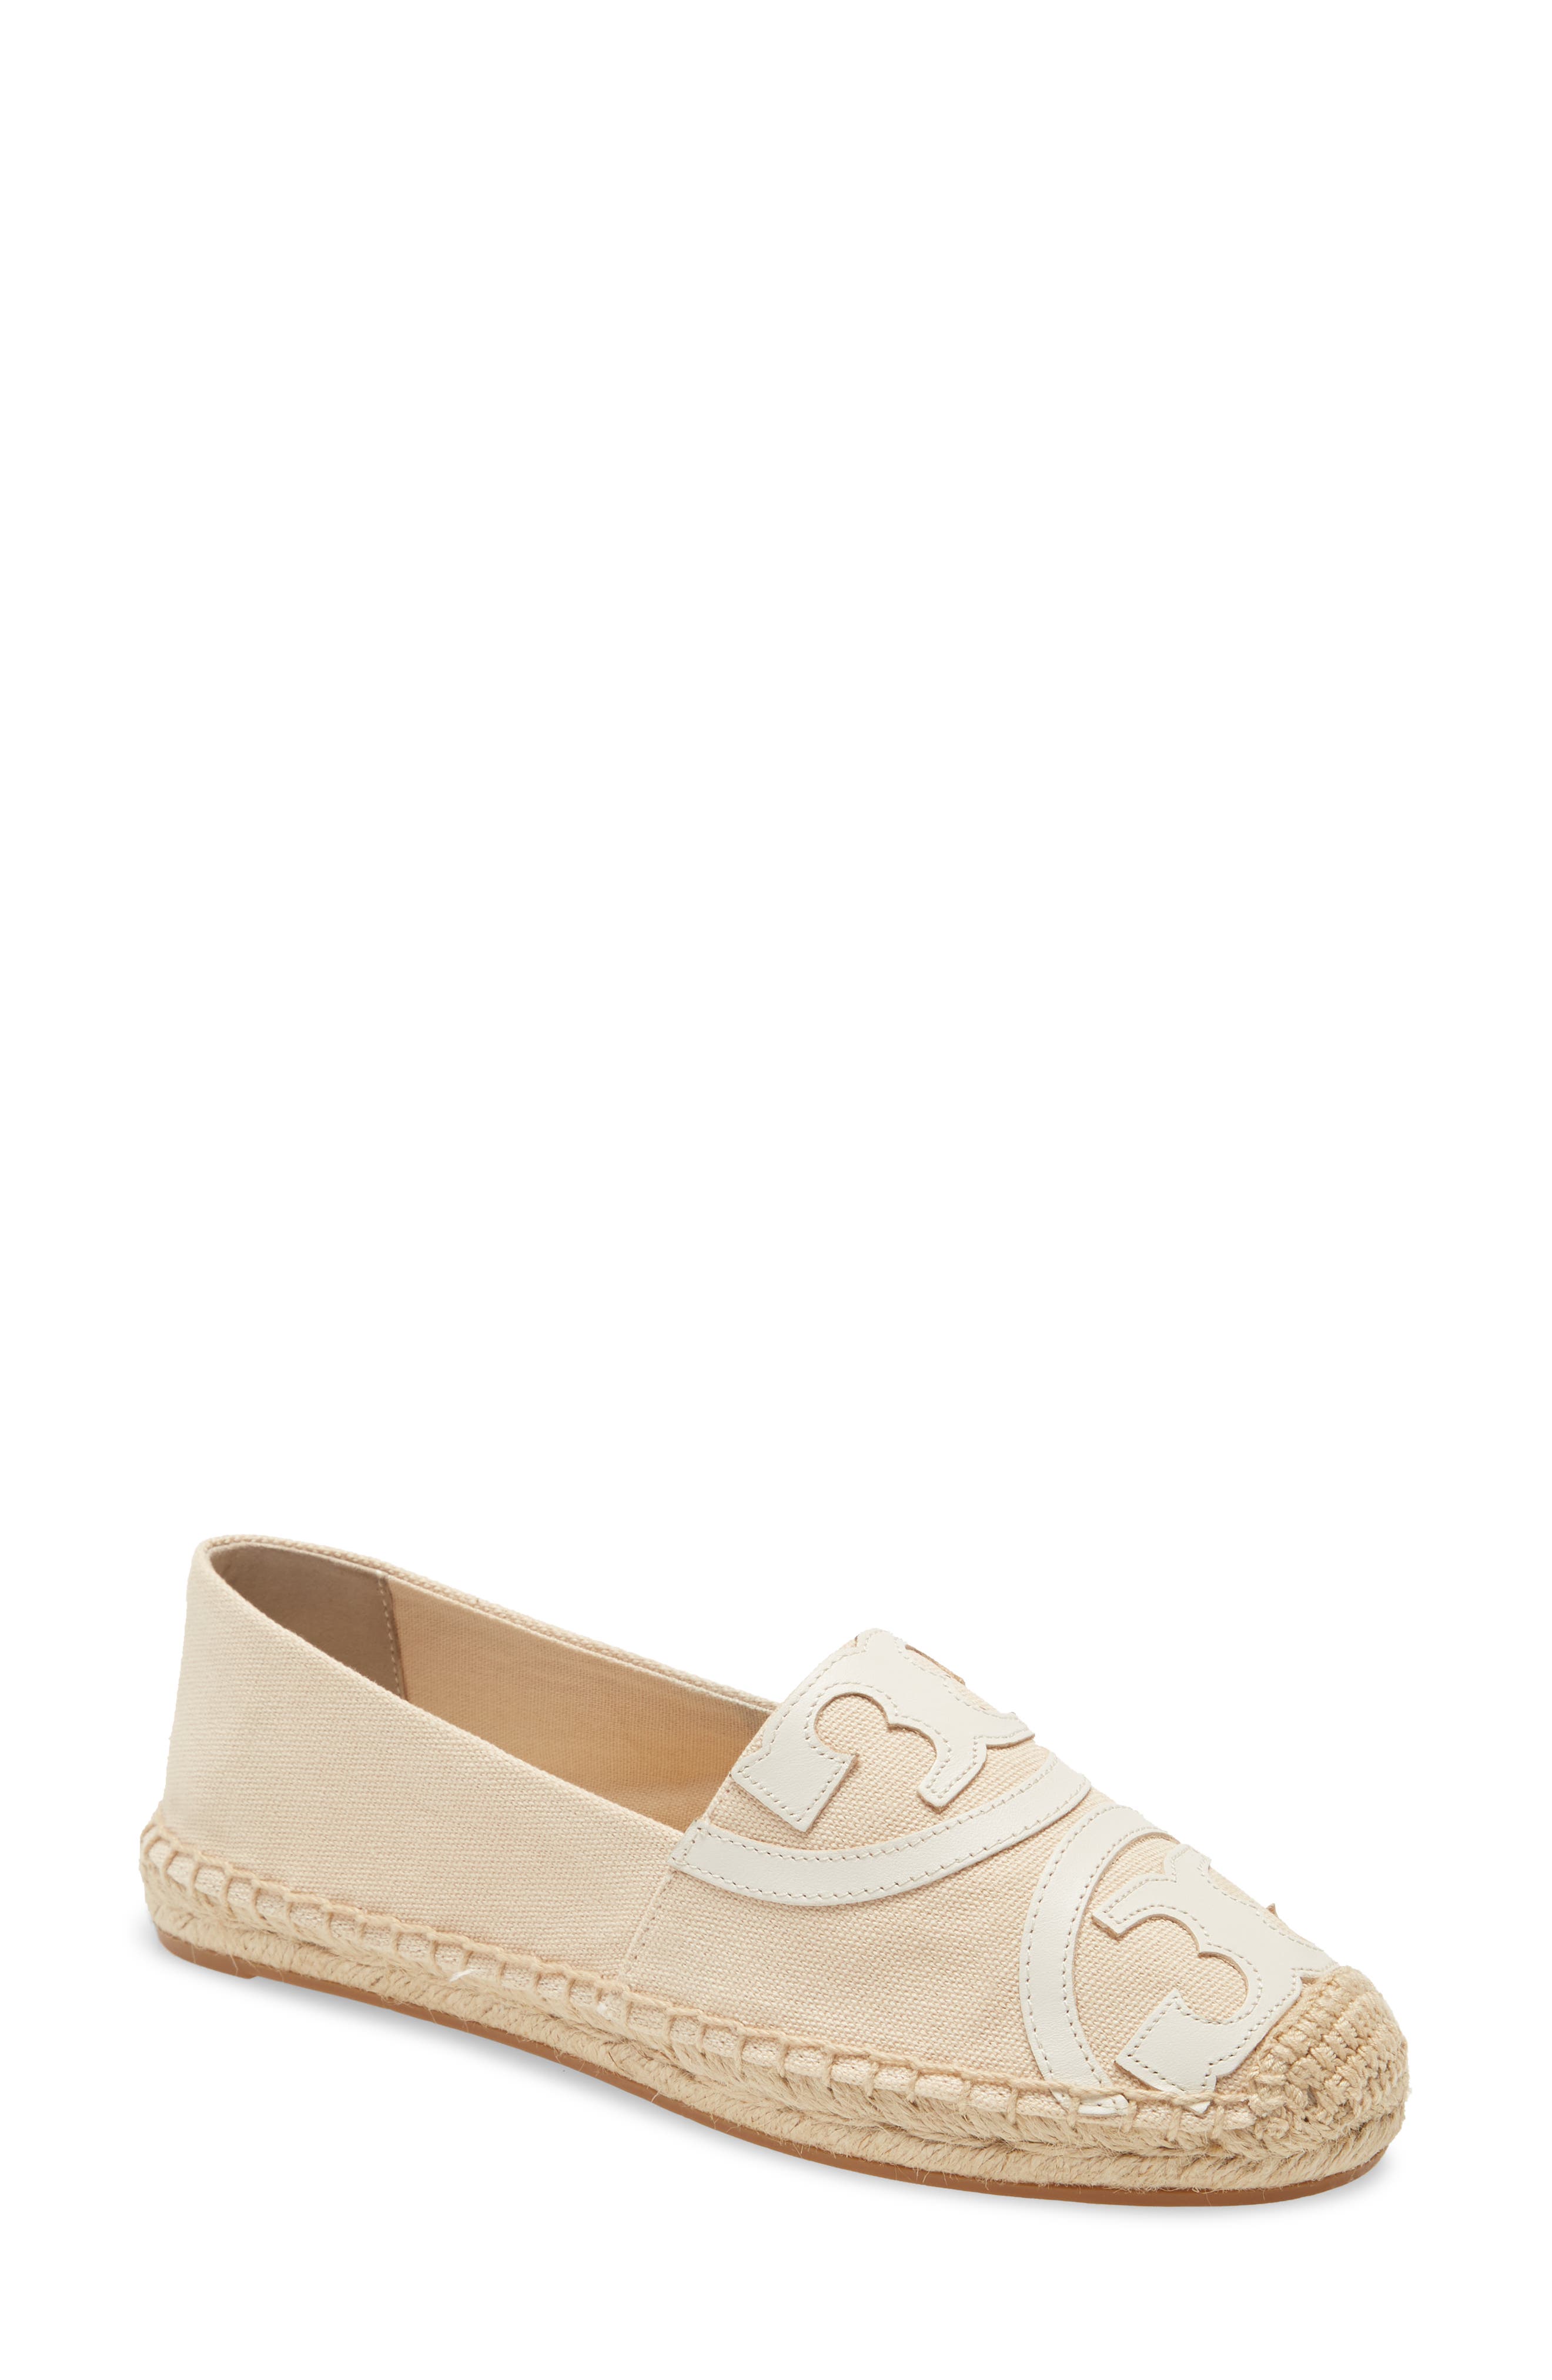 tory burch shoes nordstrom